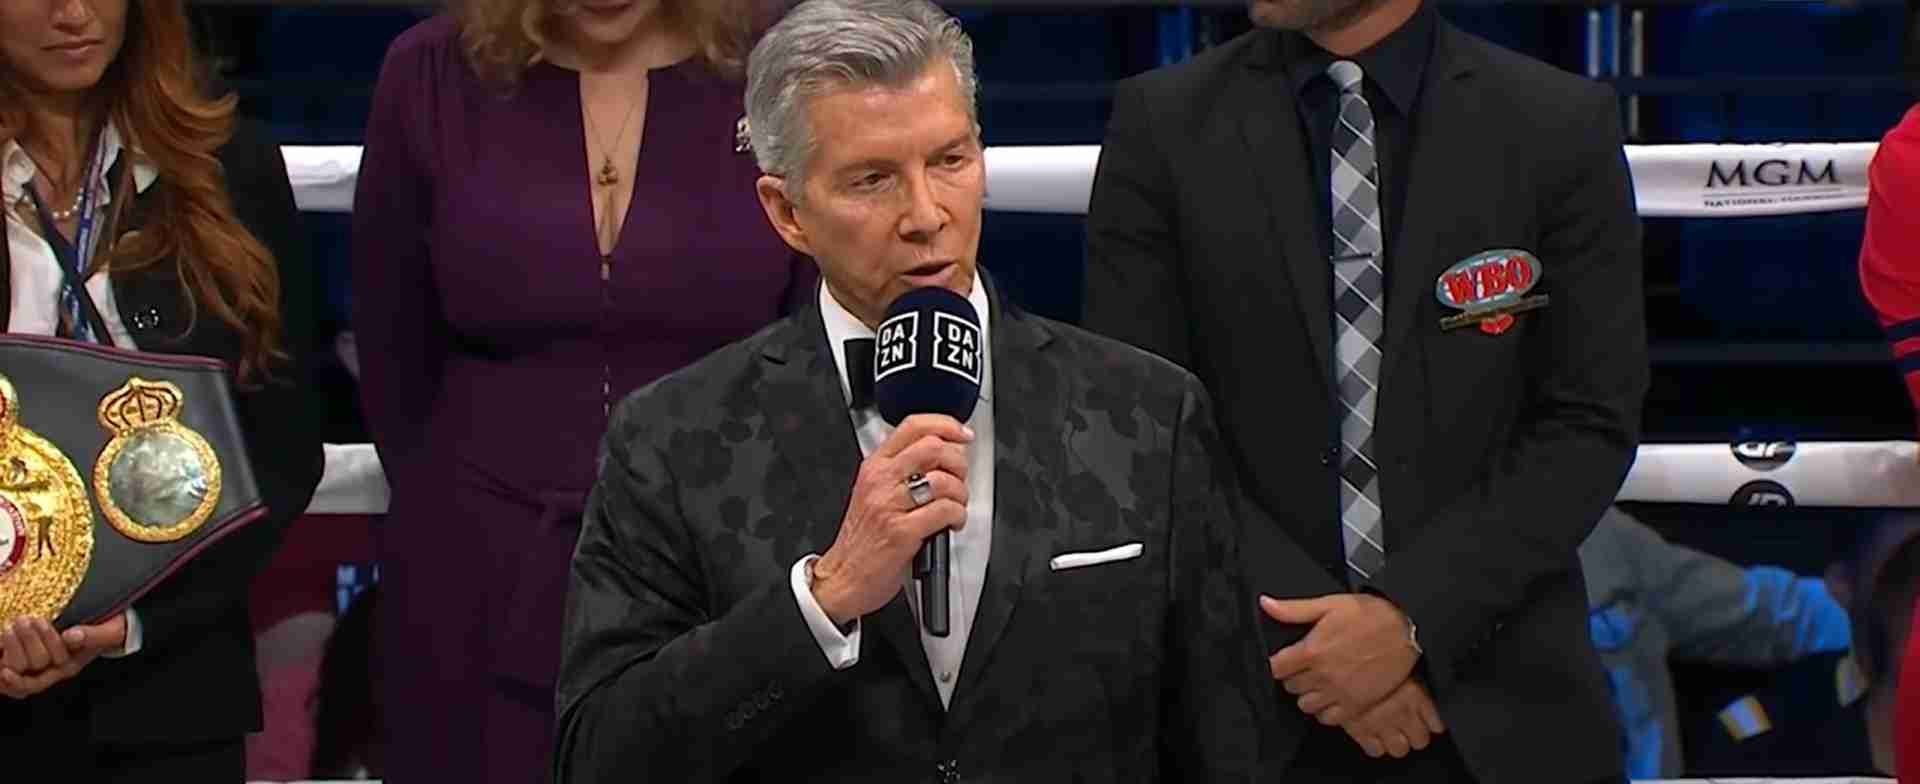 Michael Buffer Returns To Announcing In Tonight's Boxing